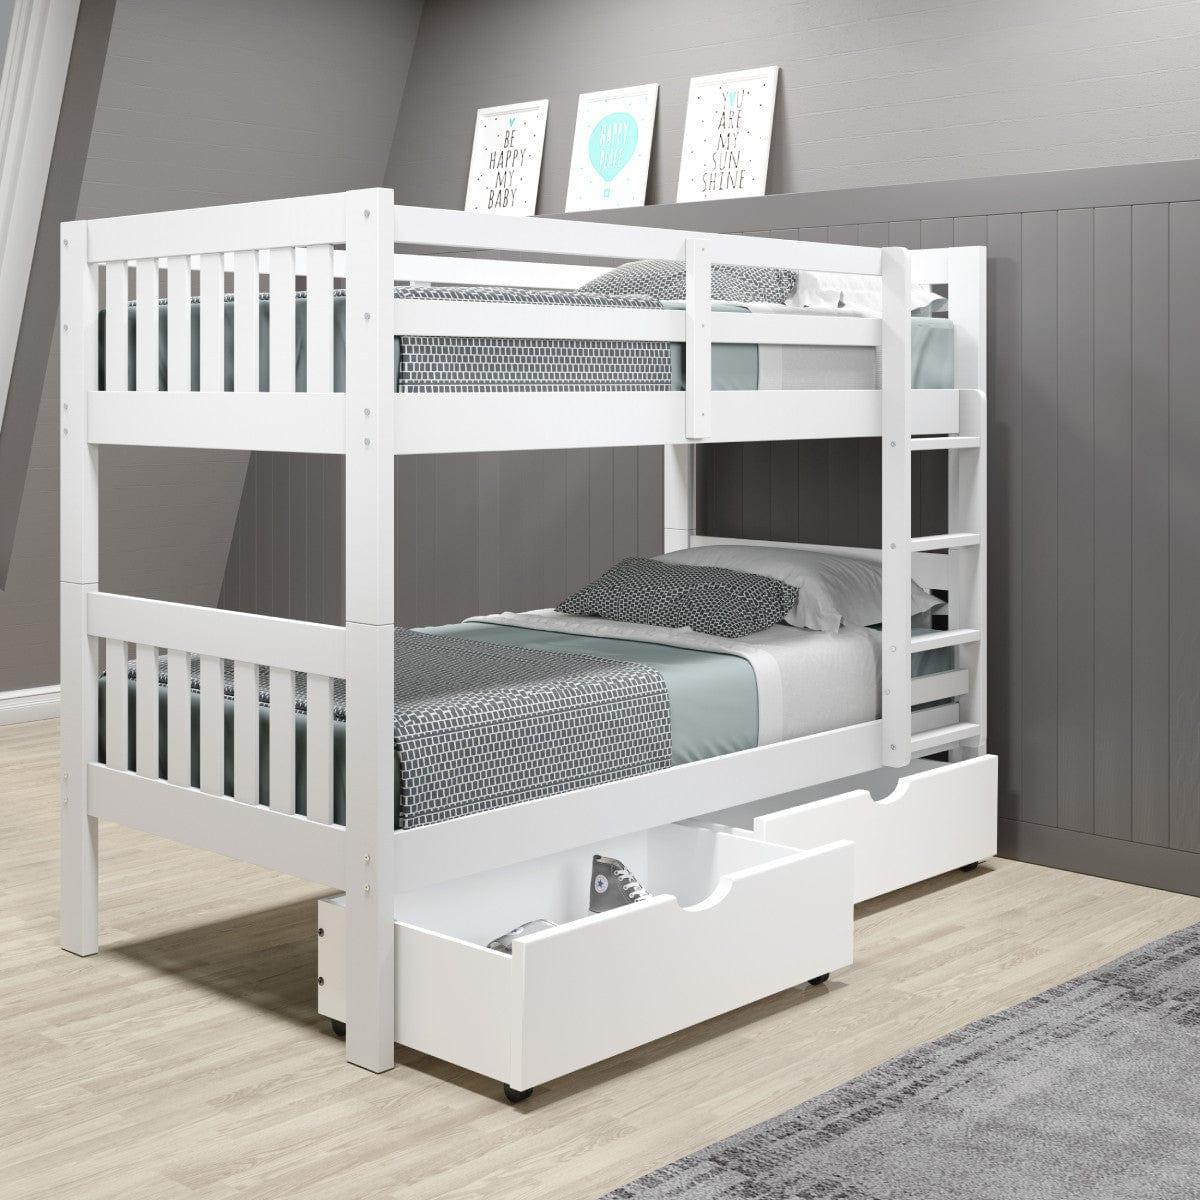 Donco Twin/Twin Mission Bunk Bed W/Dual Under Bed Drawers In White Finish 1010-3TTW_505-W - Bedroom Depot USA